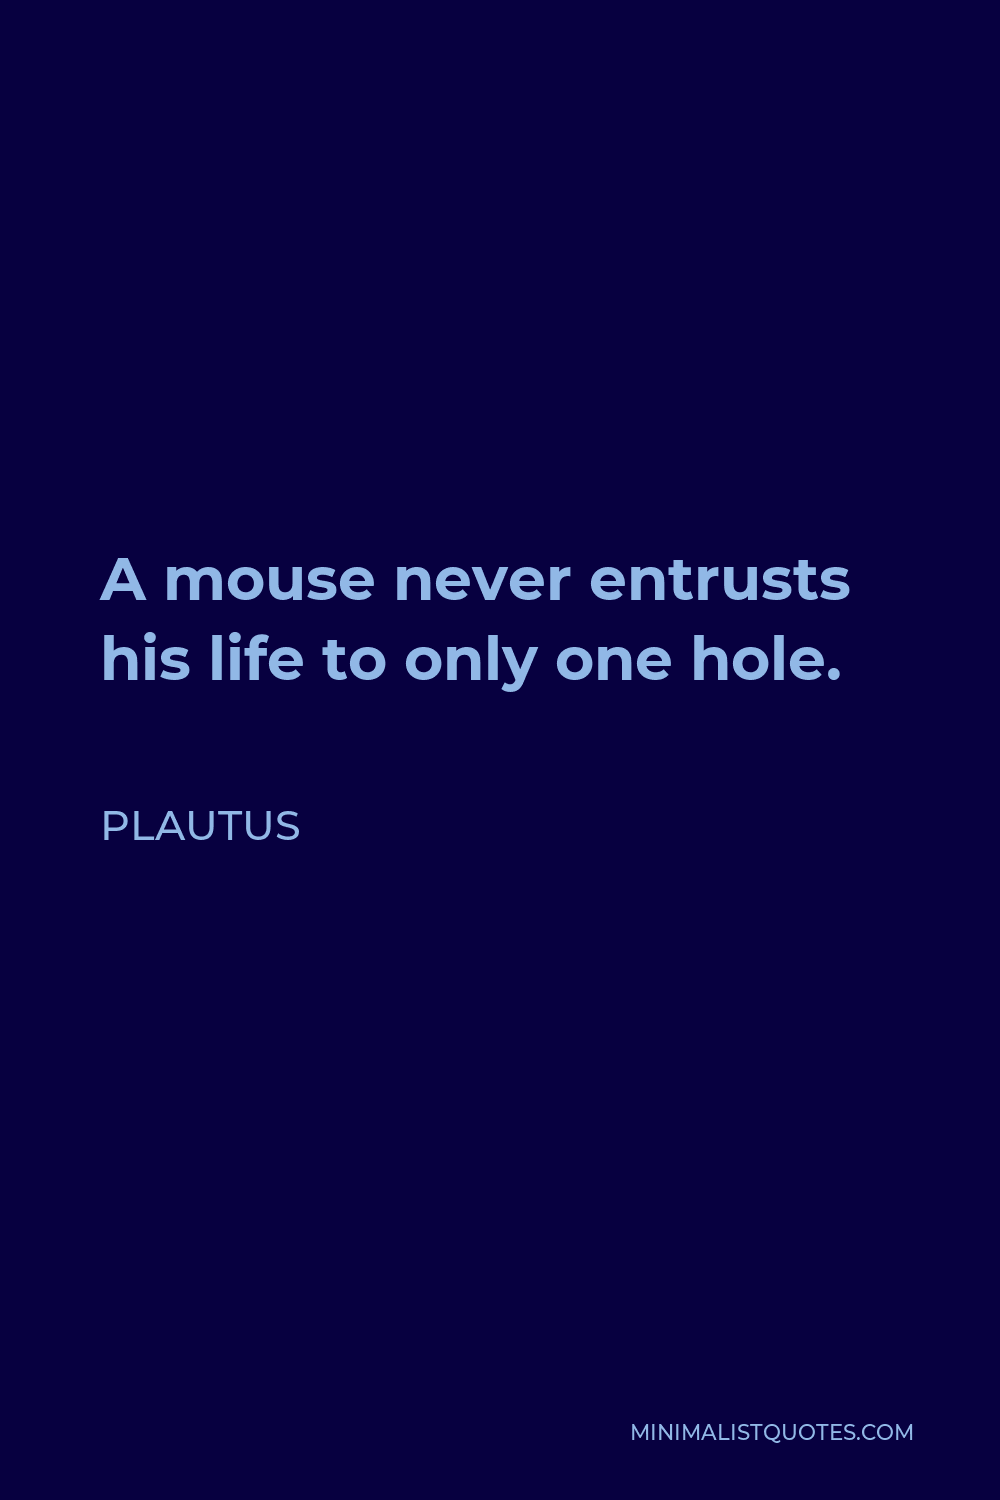 Plautus Quote - A mouse never entrusts his life to only one hole.